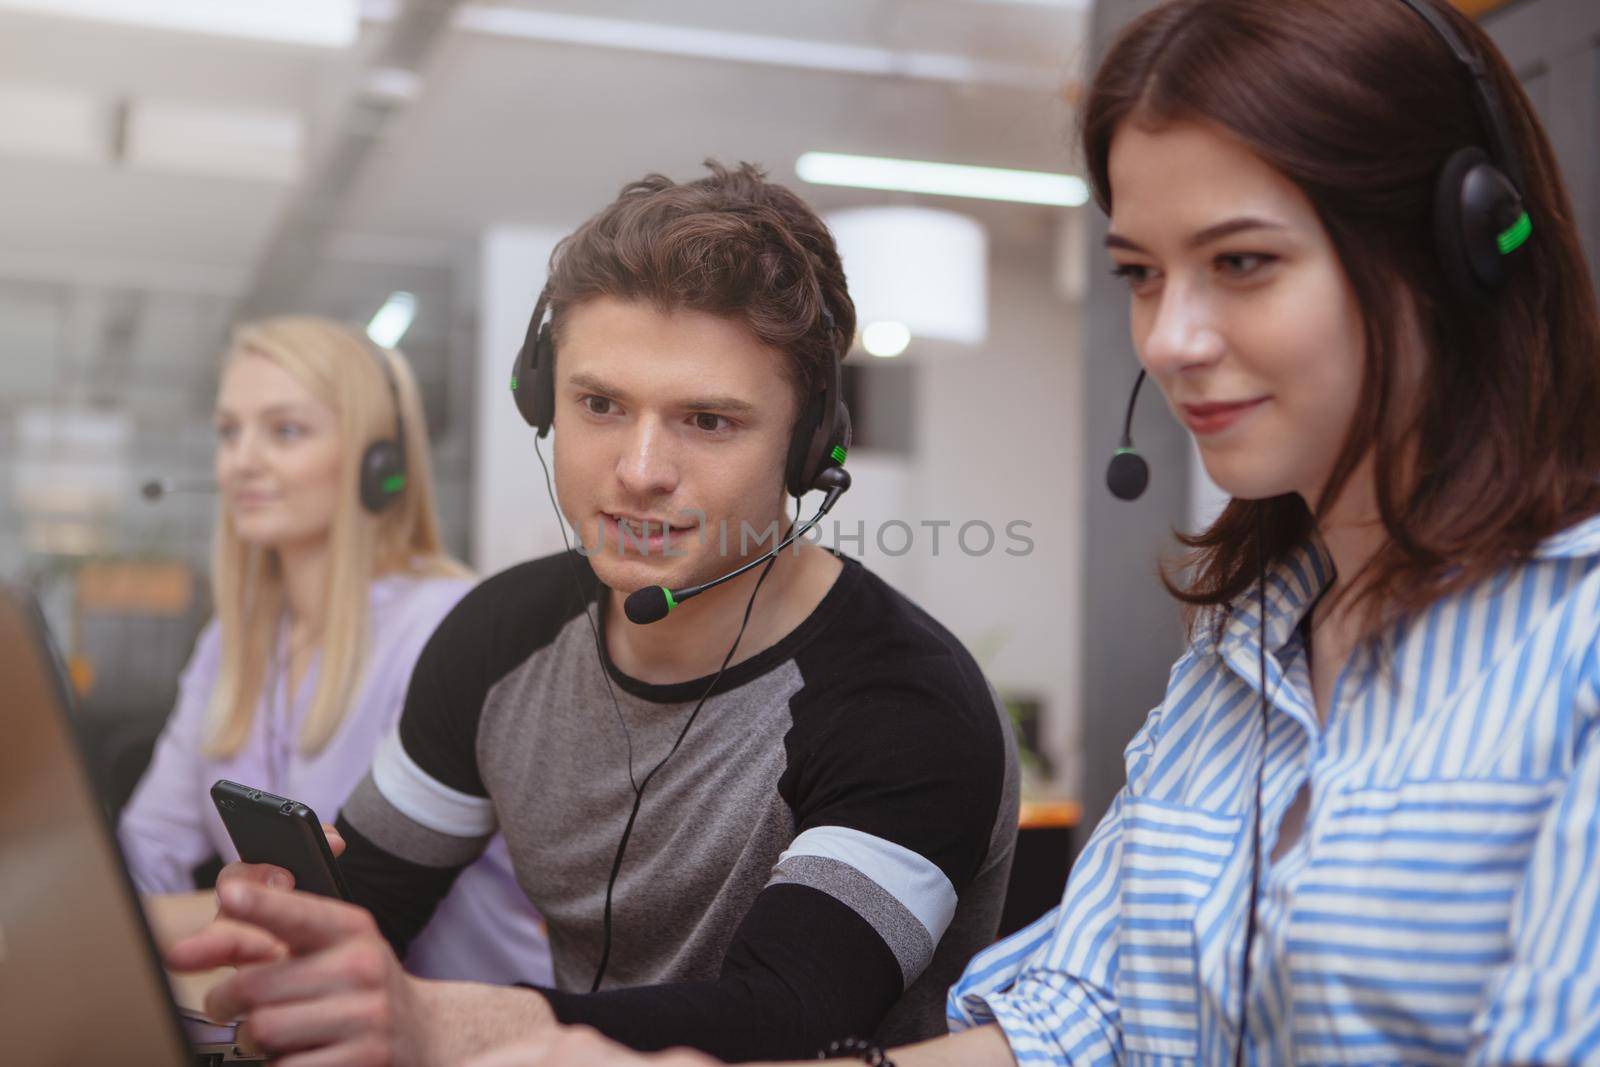 Group of young people working at customer services call center. Handsome male call center operator talking to his colleague while working. Client services operators with headsets working on computers